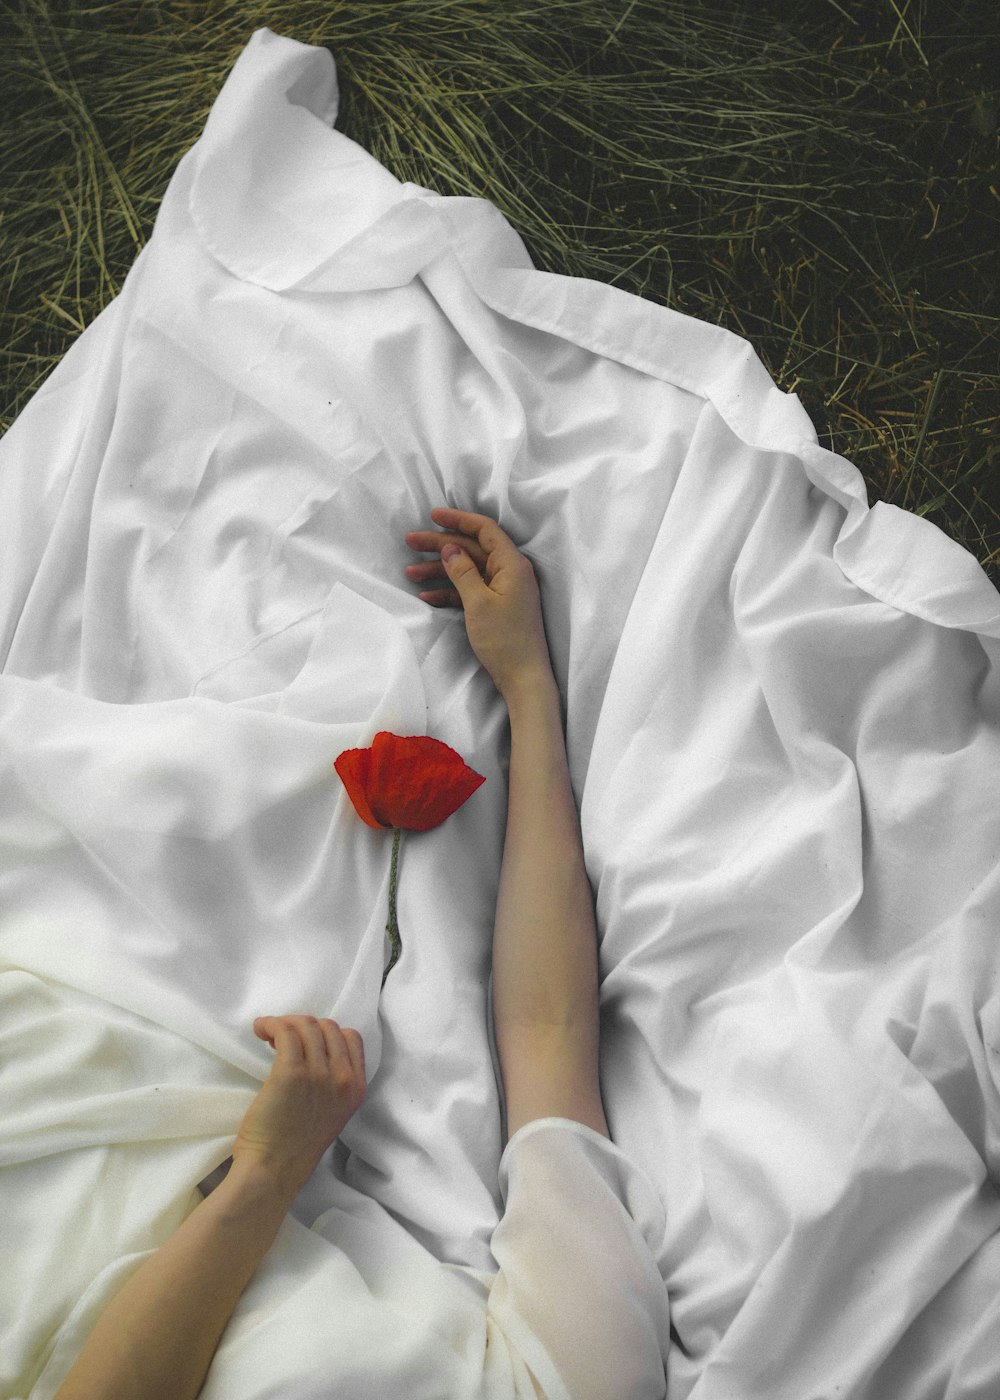 person in white robe holding red rose